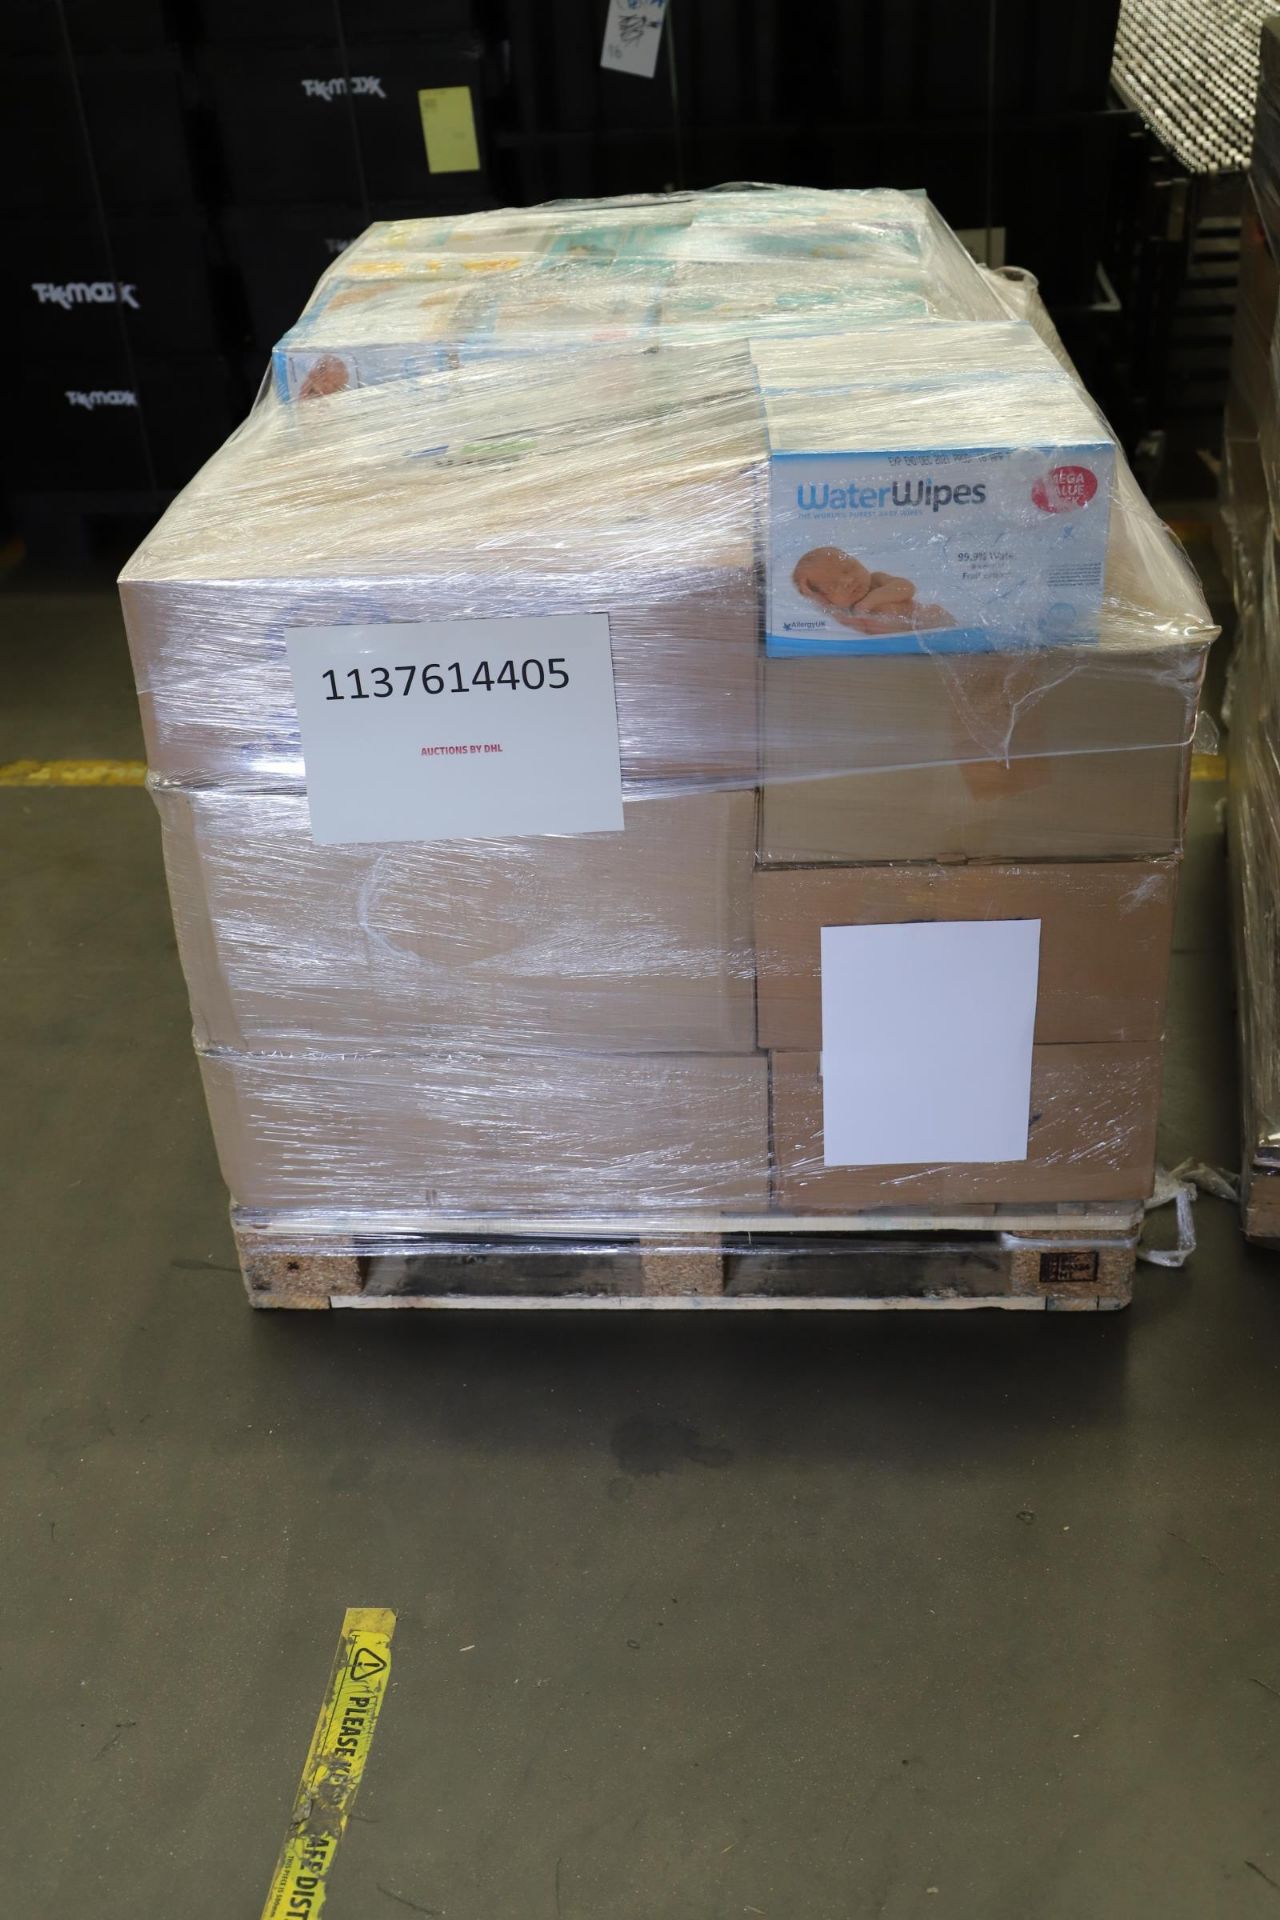 Mixed Pallet of 843 items, Brands include Babybjorn & Frozen. Total RRP Approx £9,189